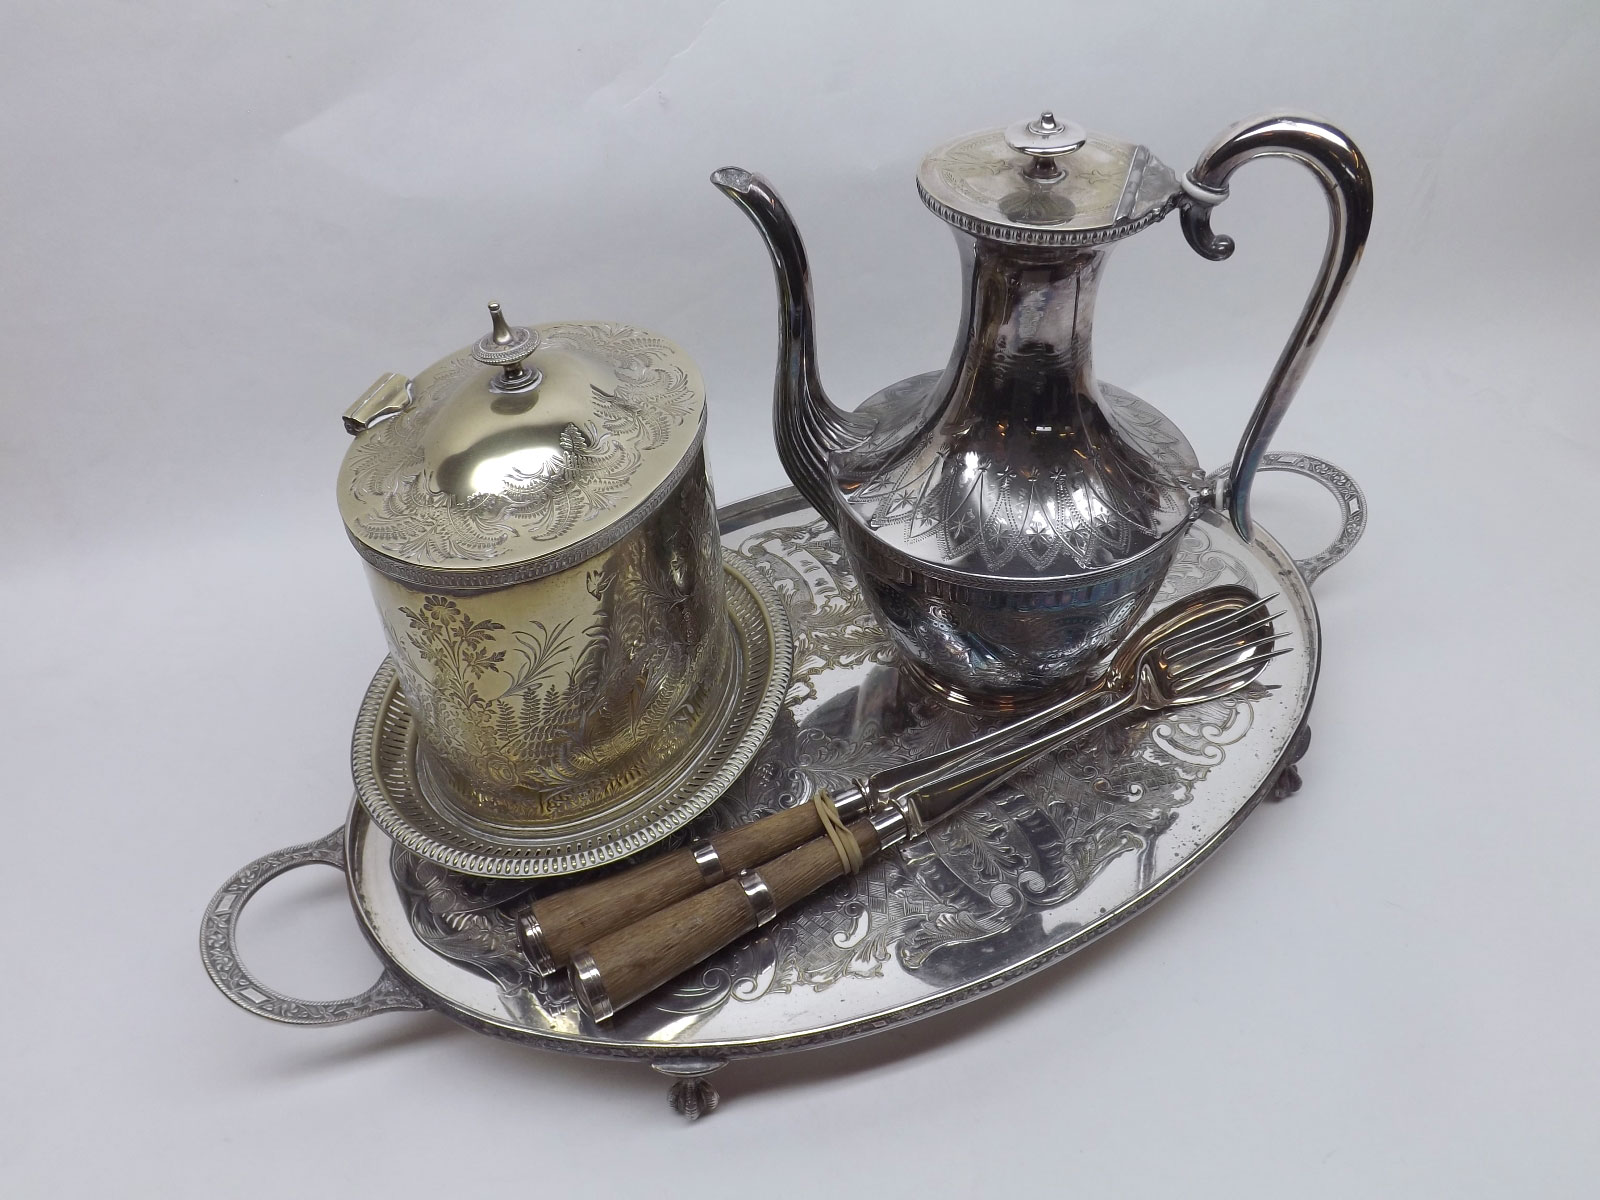 A Mixed Lot comprising: oval Silver Plated Double-handled Serving Tray, Silver Plate and Wooden-